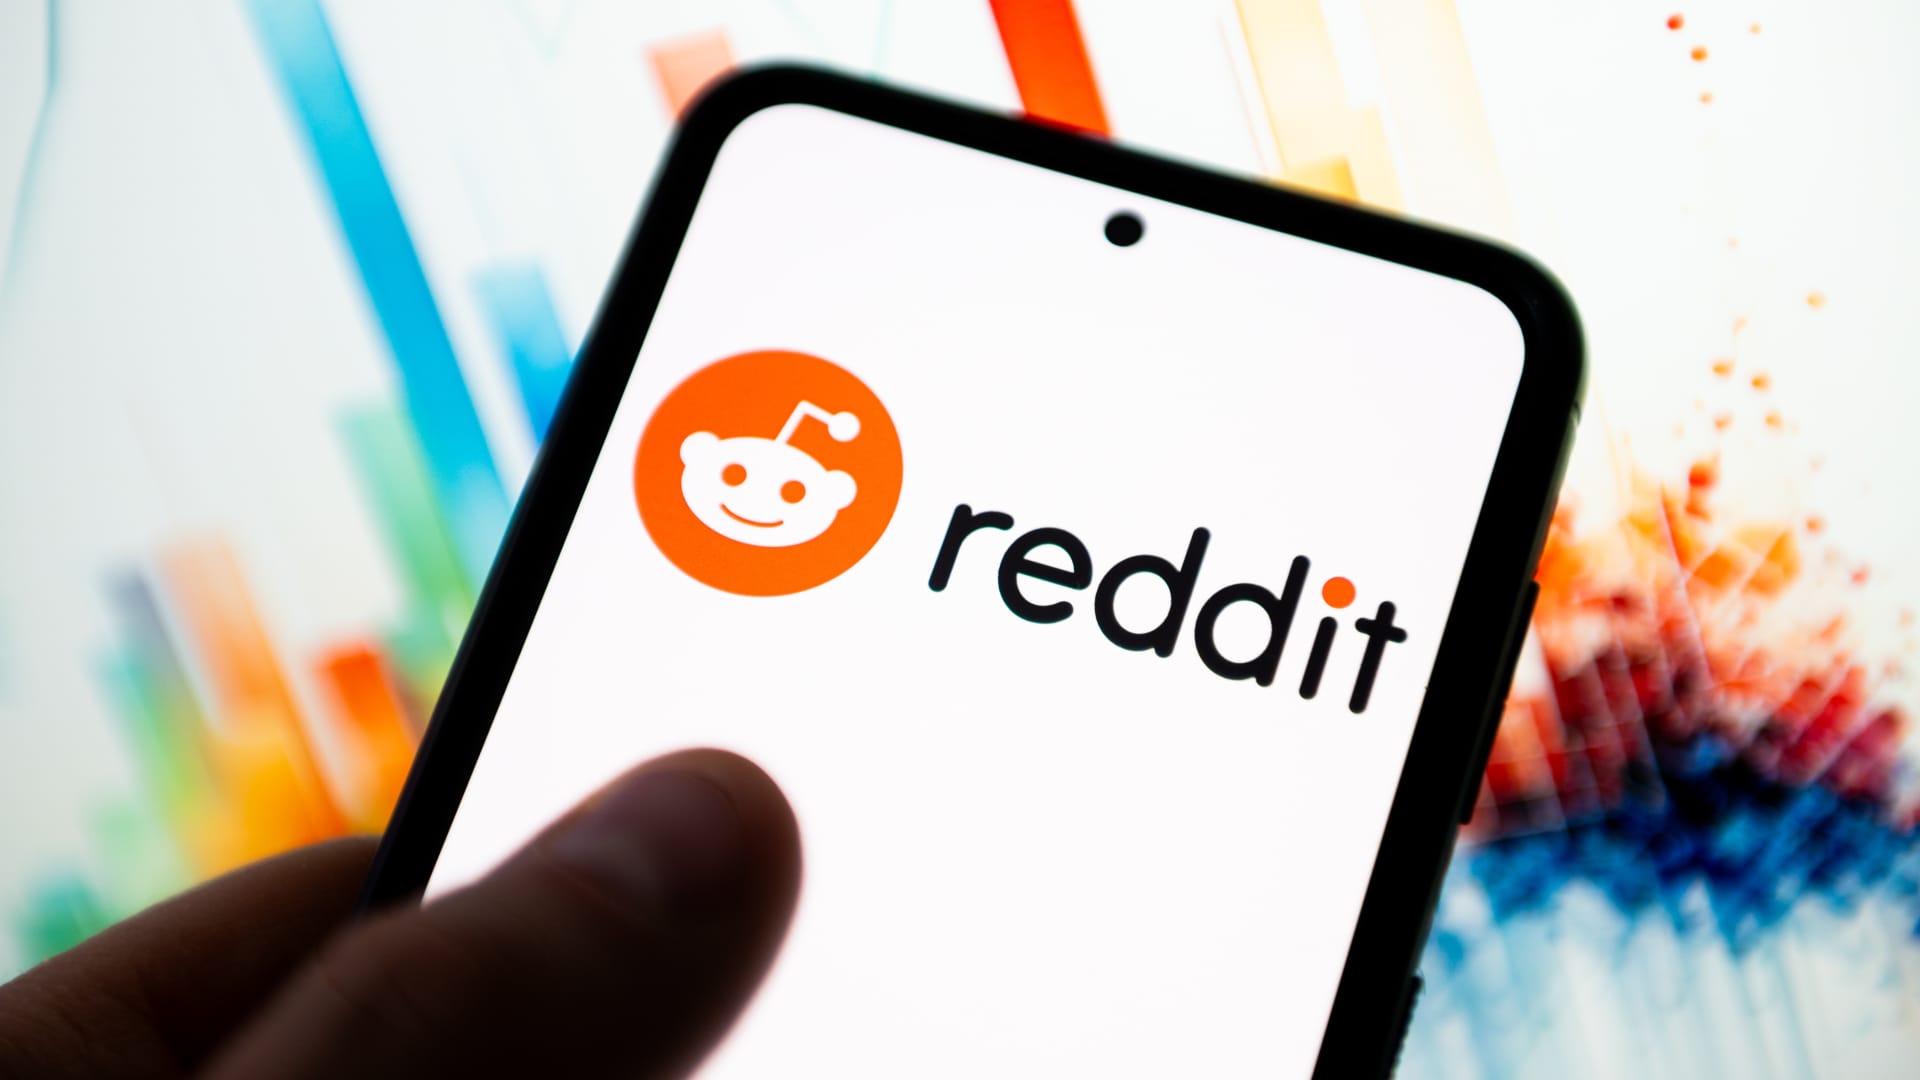 FTC conducting inquiry into Reddit’s AI data-licensing practices ahead of IPO